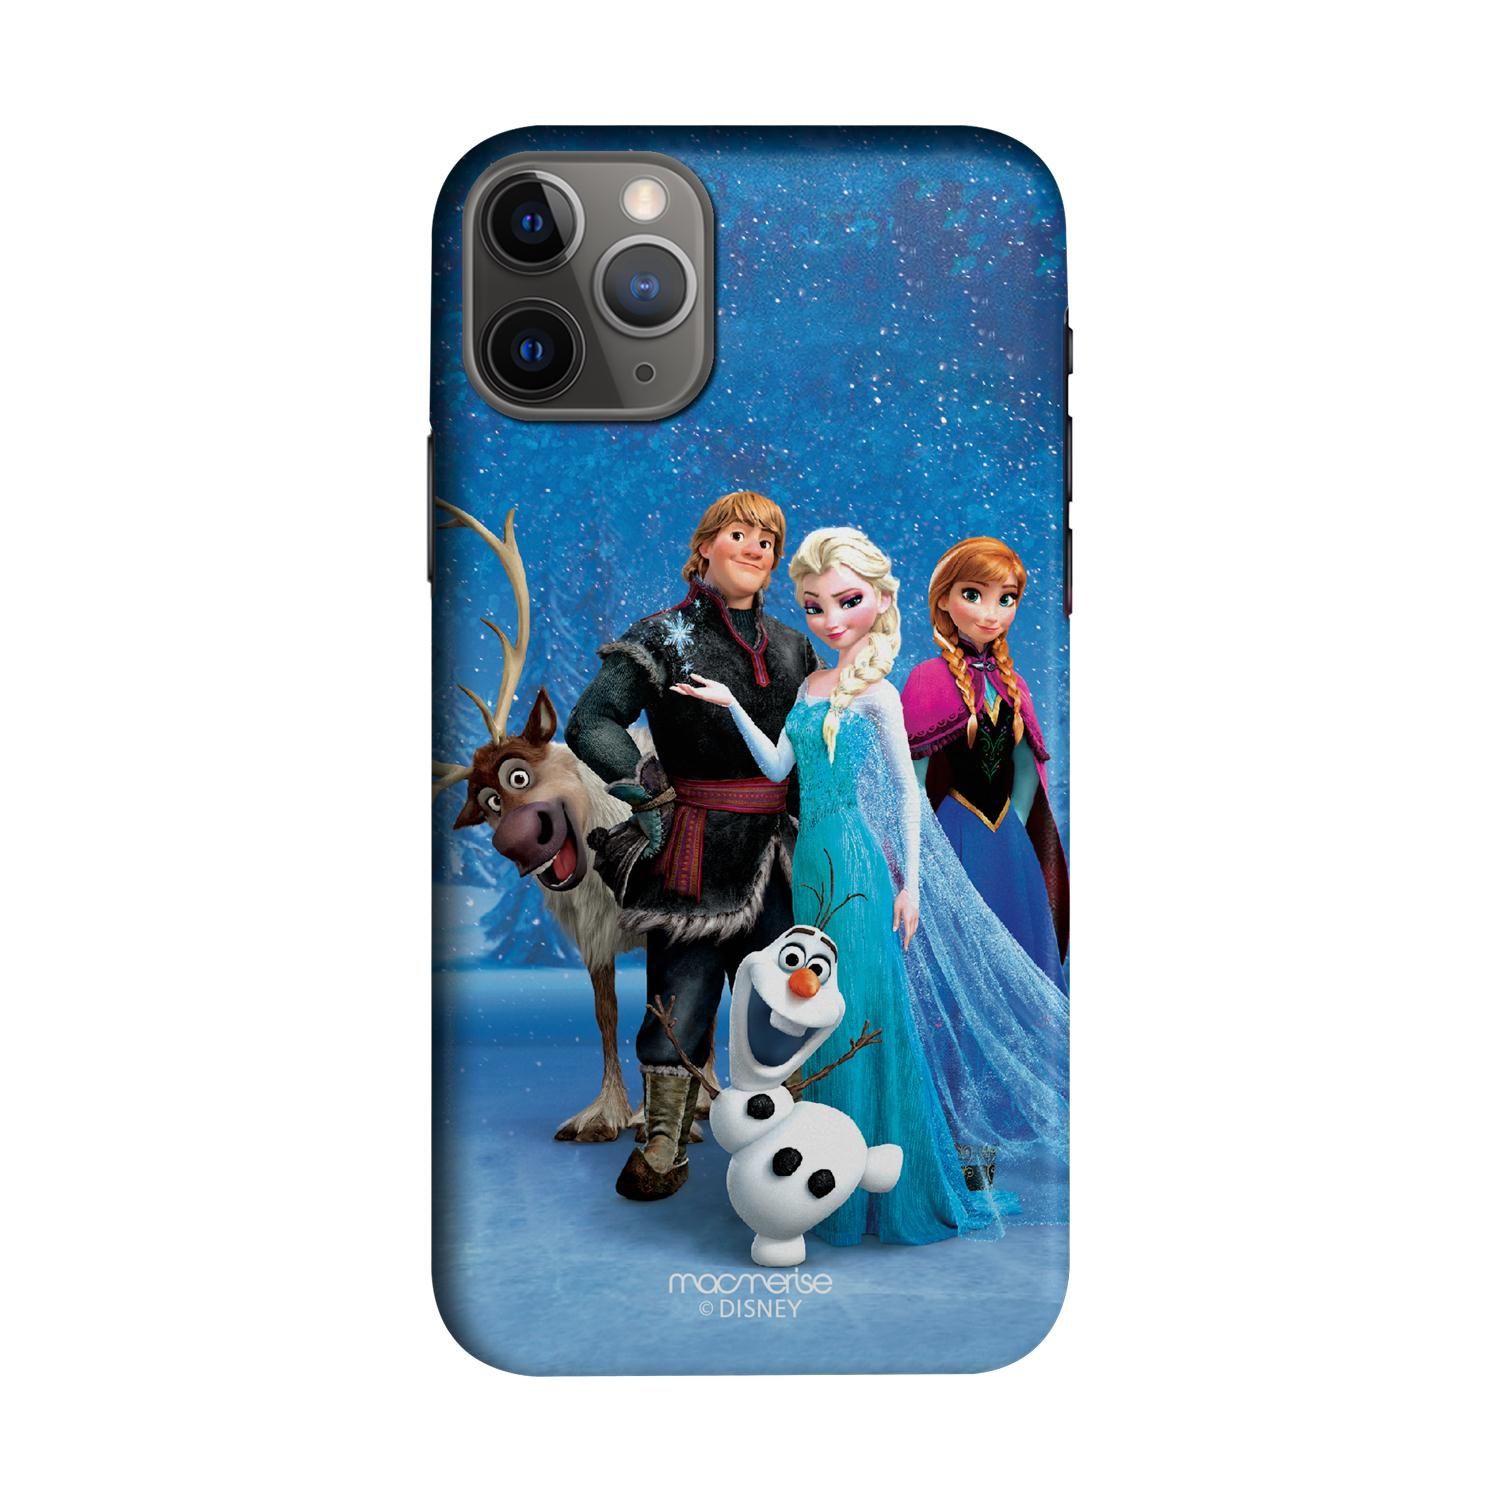 Buy Frozen together - Sleek Phone Case for iPhone 11 Pro Max Online